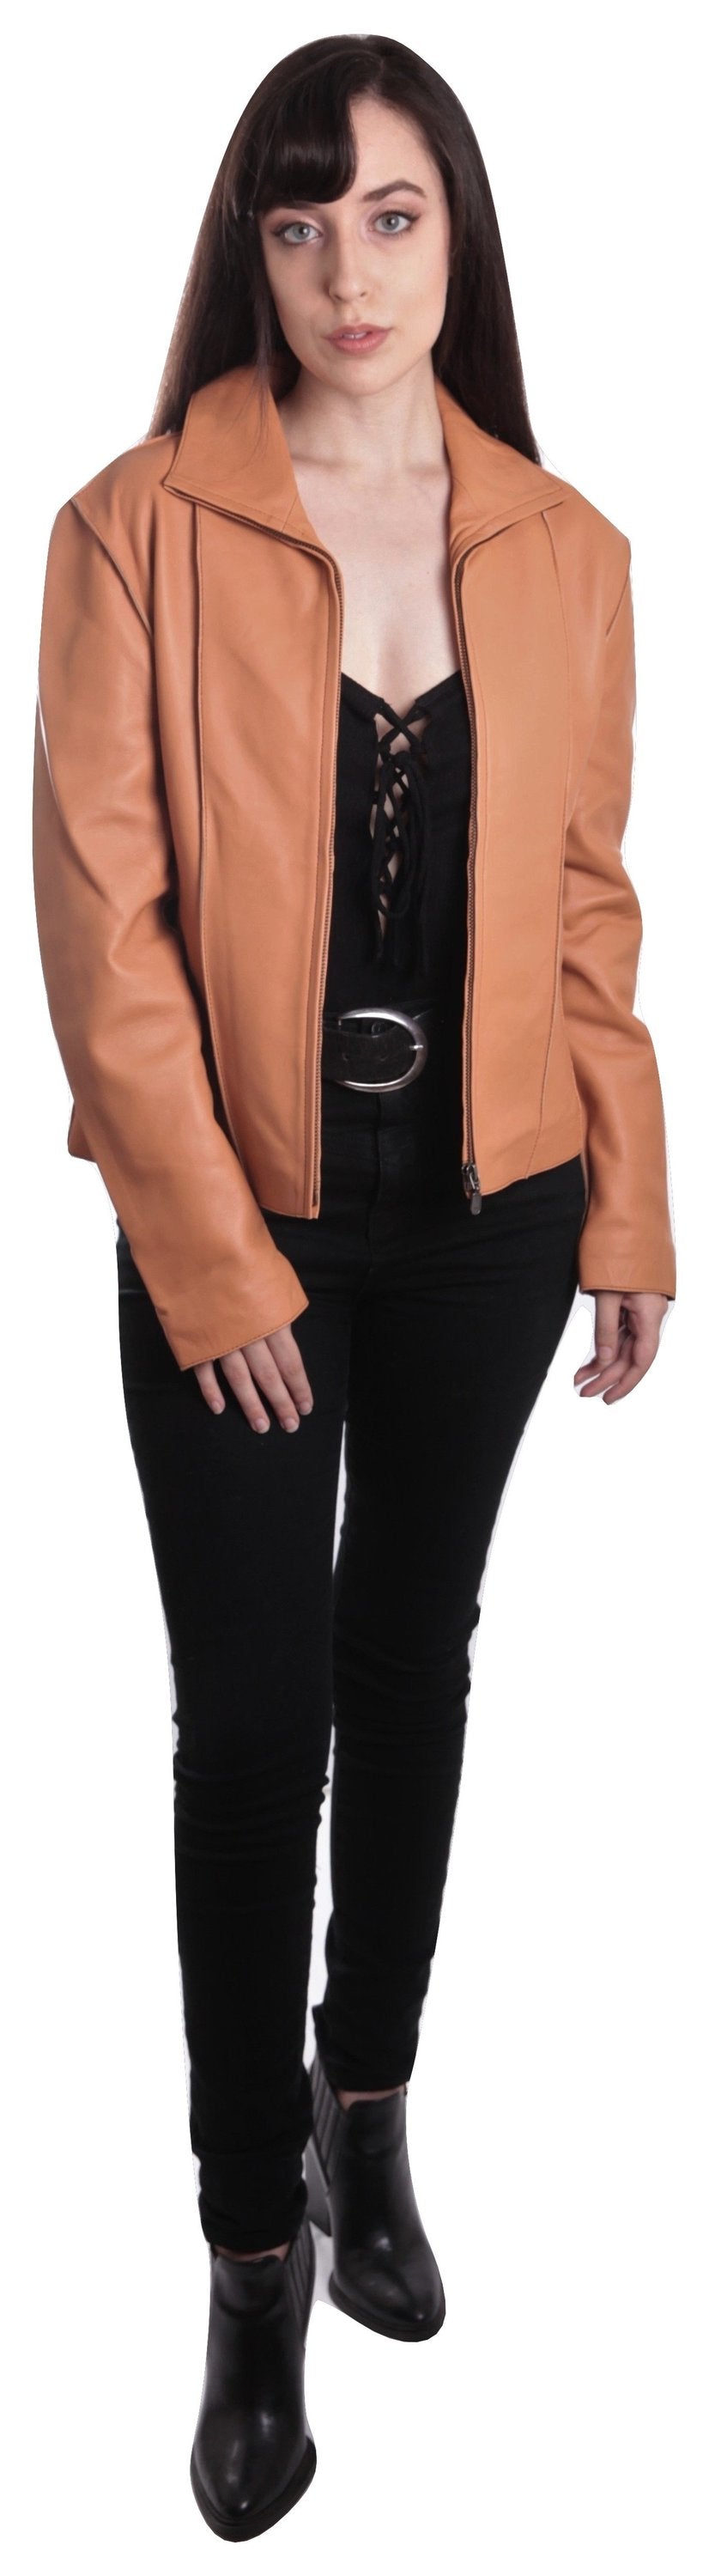 Picture of a Picture of a Women's Professional Stunner Sheepskin Leather Jacket full front view